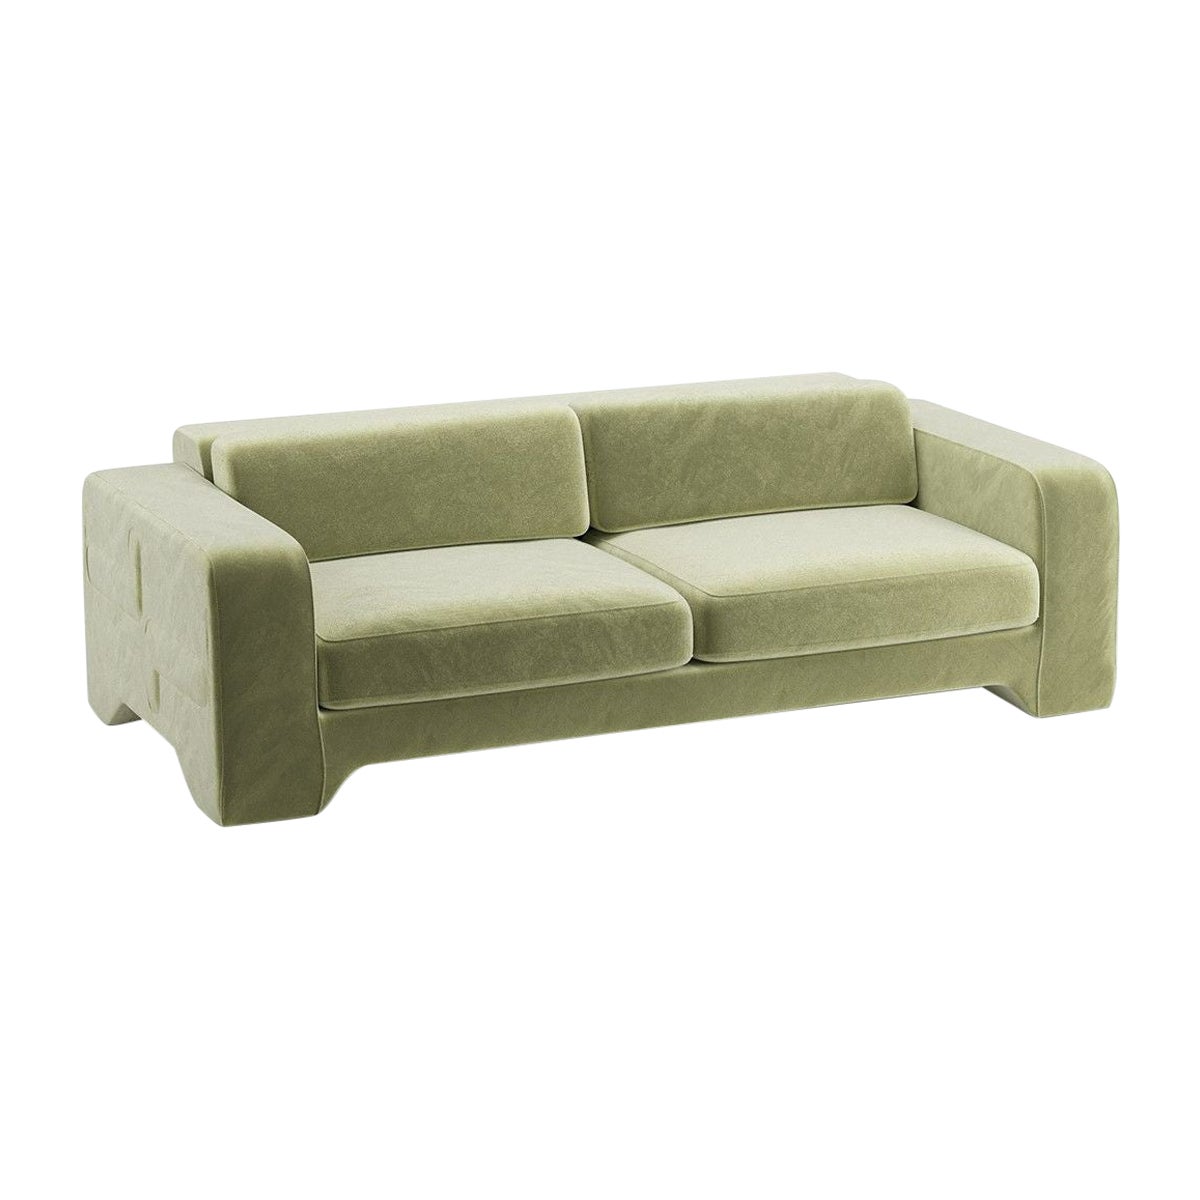 Popus Editions Giovanna 4 Seater Sofa in Almond Green Como Velvet Upholstery For Sale